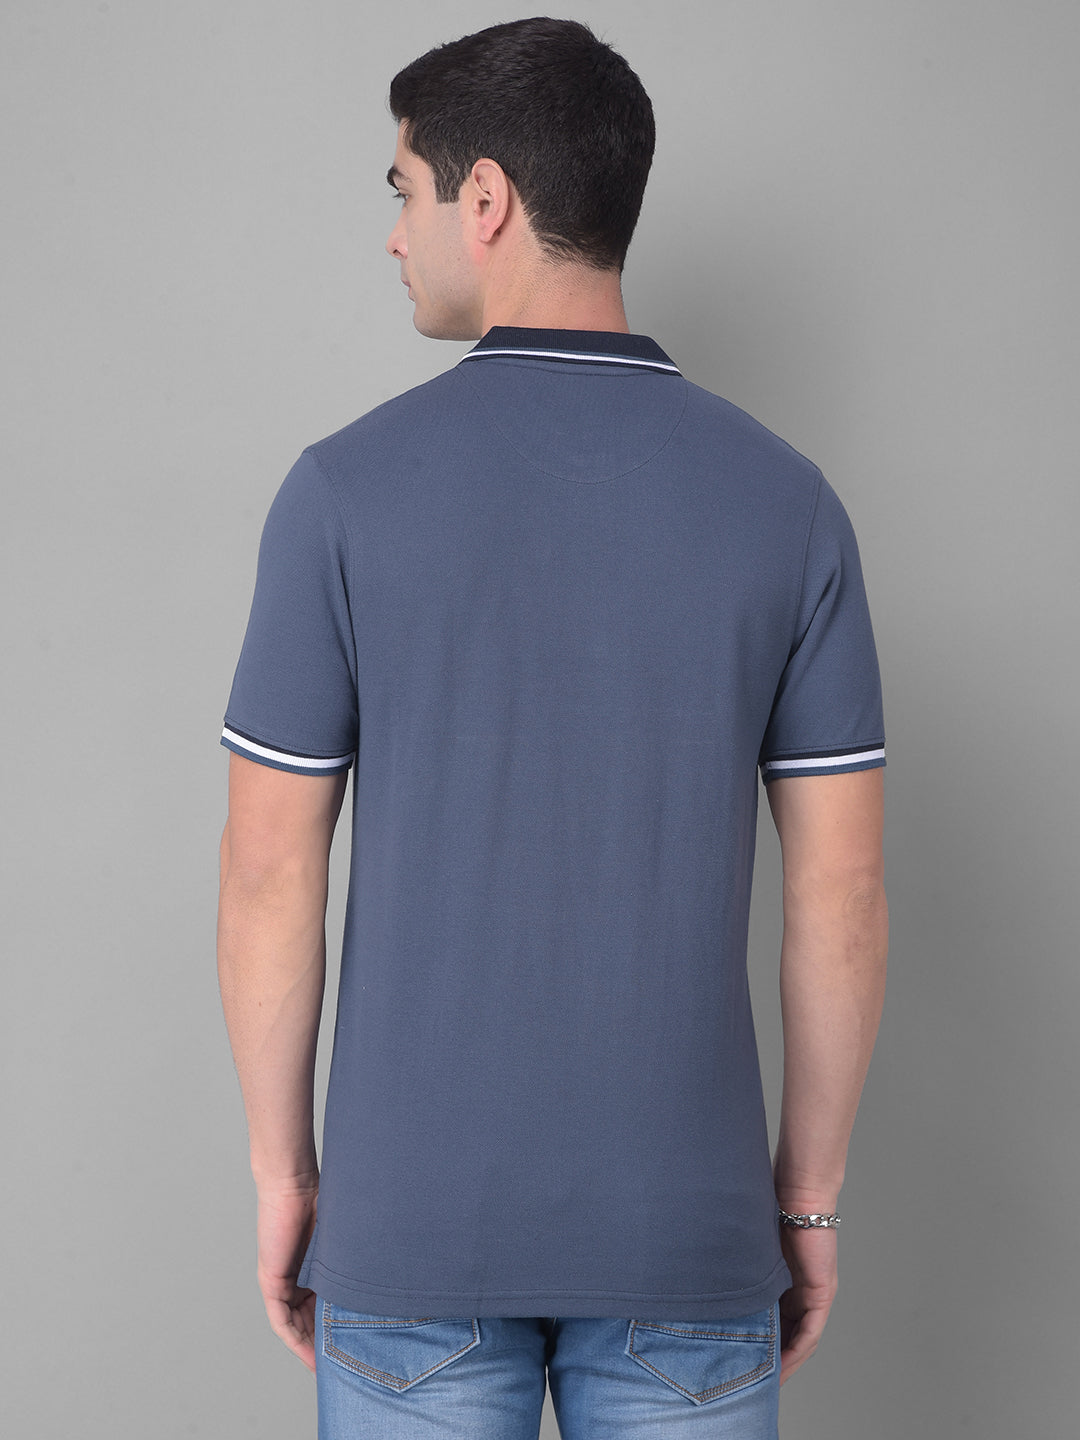 cobb solid air force blue polo neck t-shirt